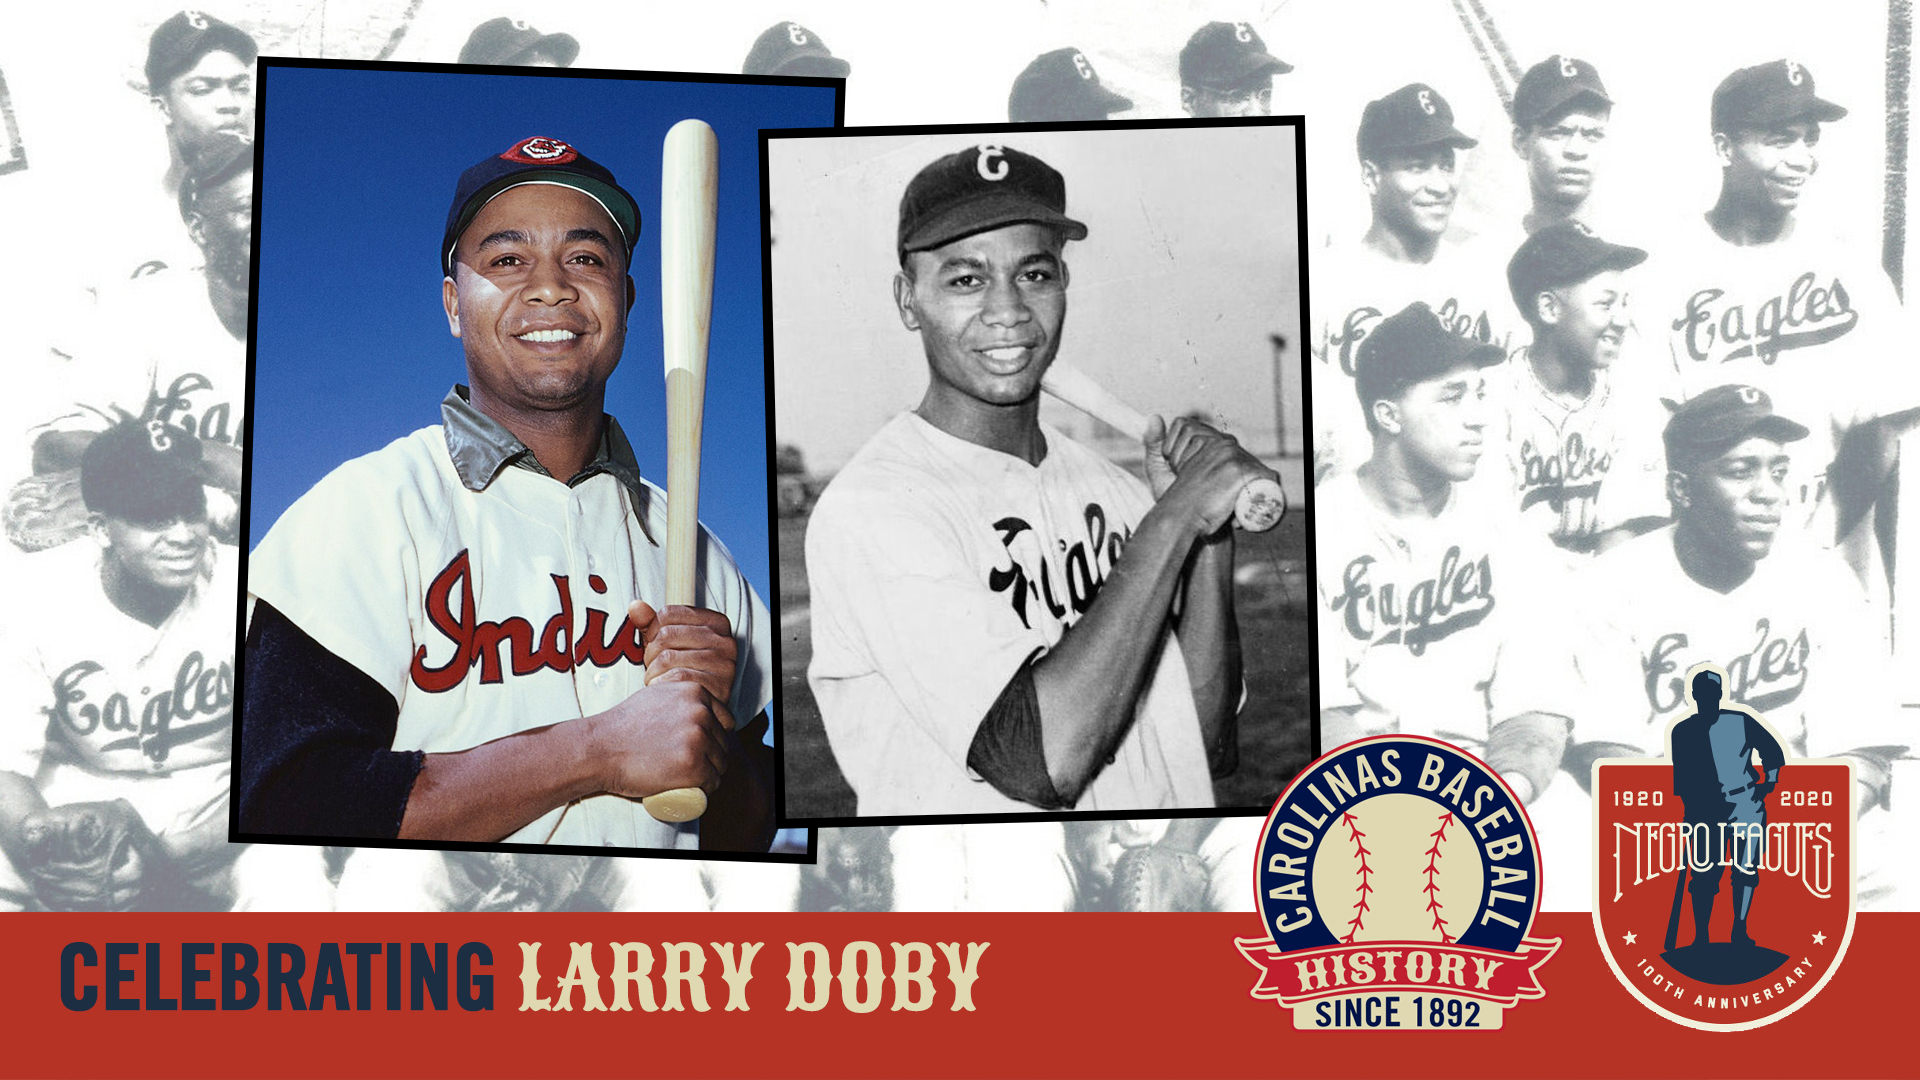 Paterson, N.J. honors Larry Doby, who broke the American League's color  barrier in 1947 - CBS New York